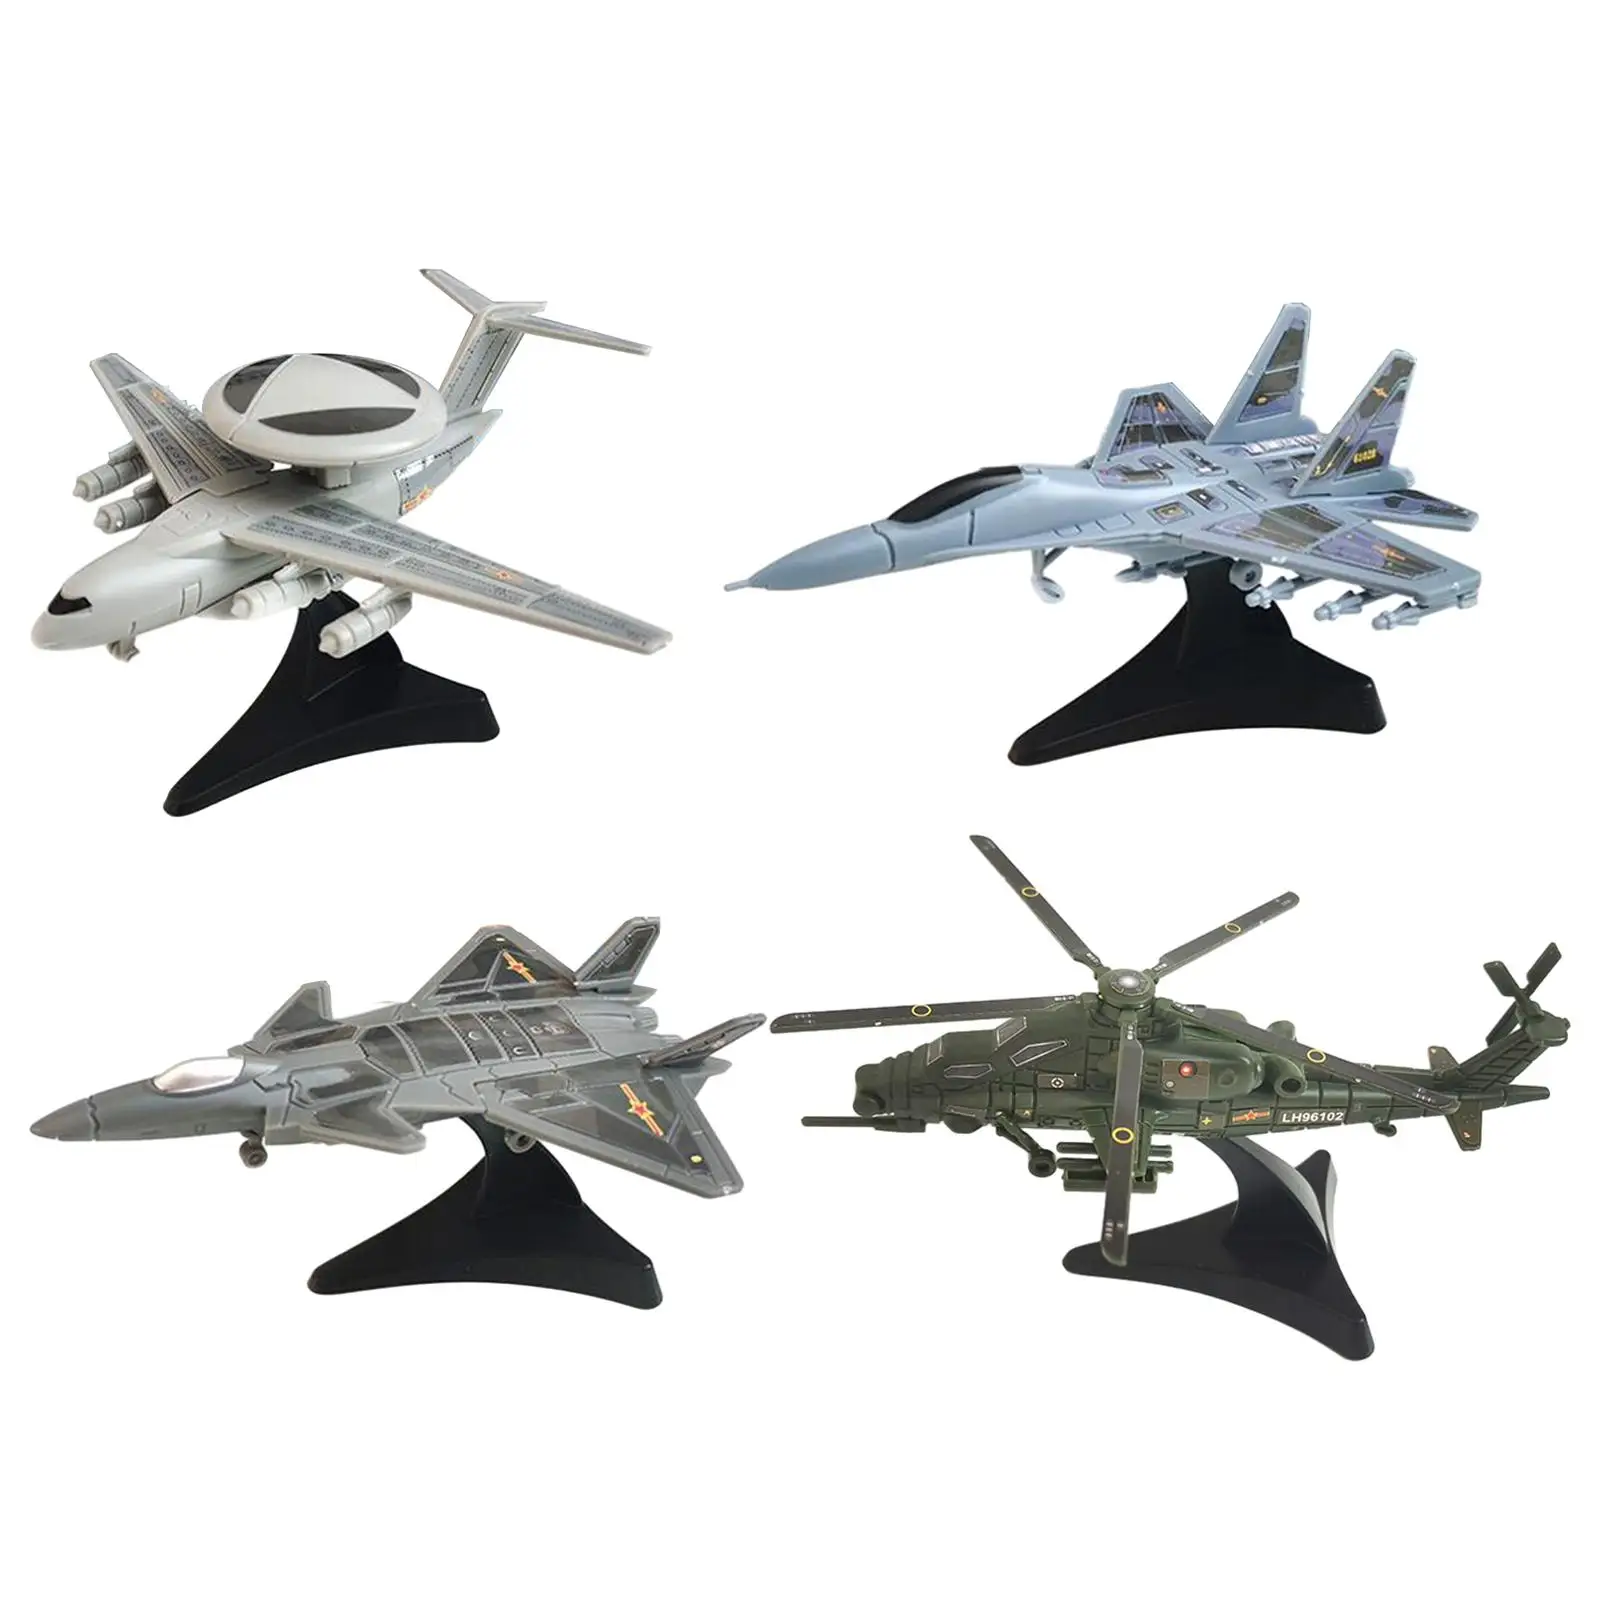 4 Pieces Miniature Airplane Toys DIY Assemble Tabletop Decor Plane Model Kits to Build for Boy Children Kids Girls Adults